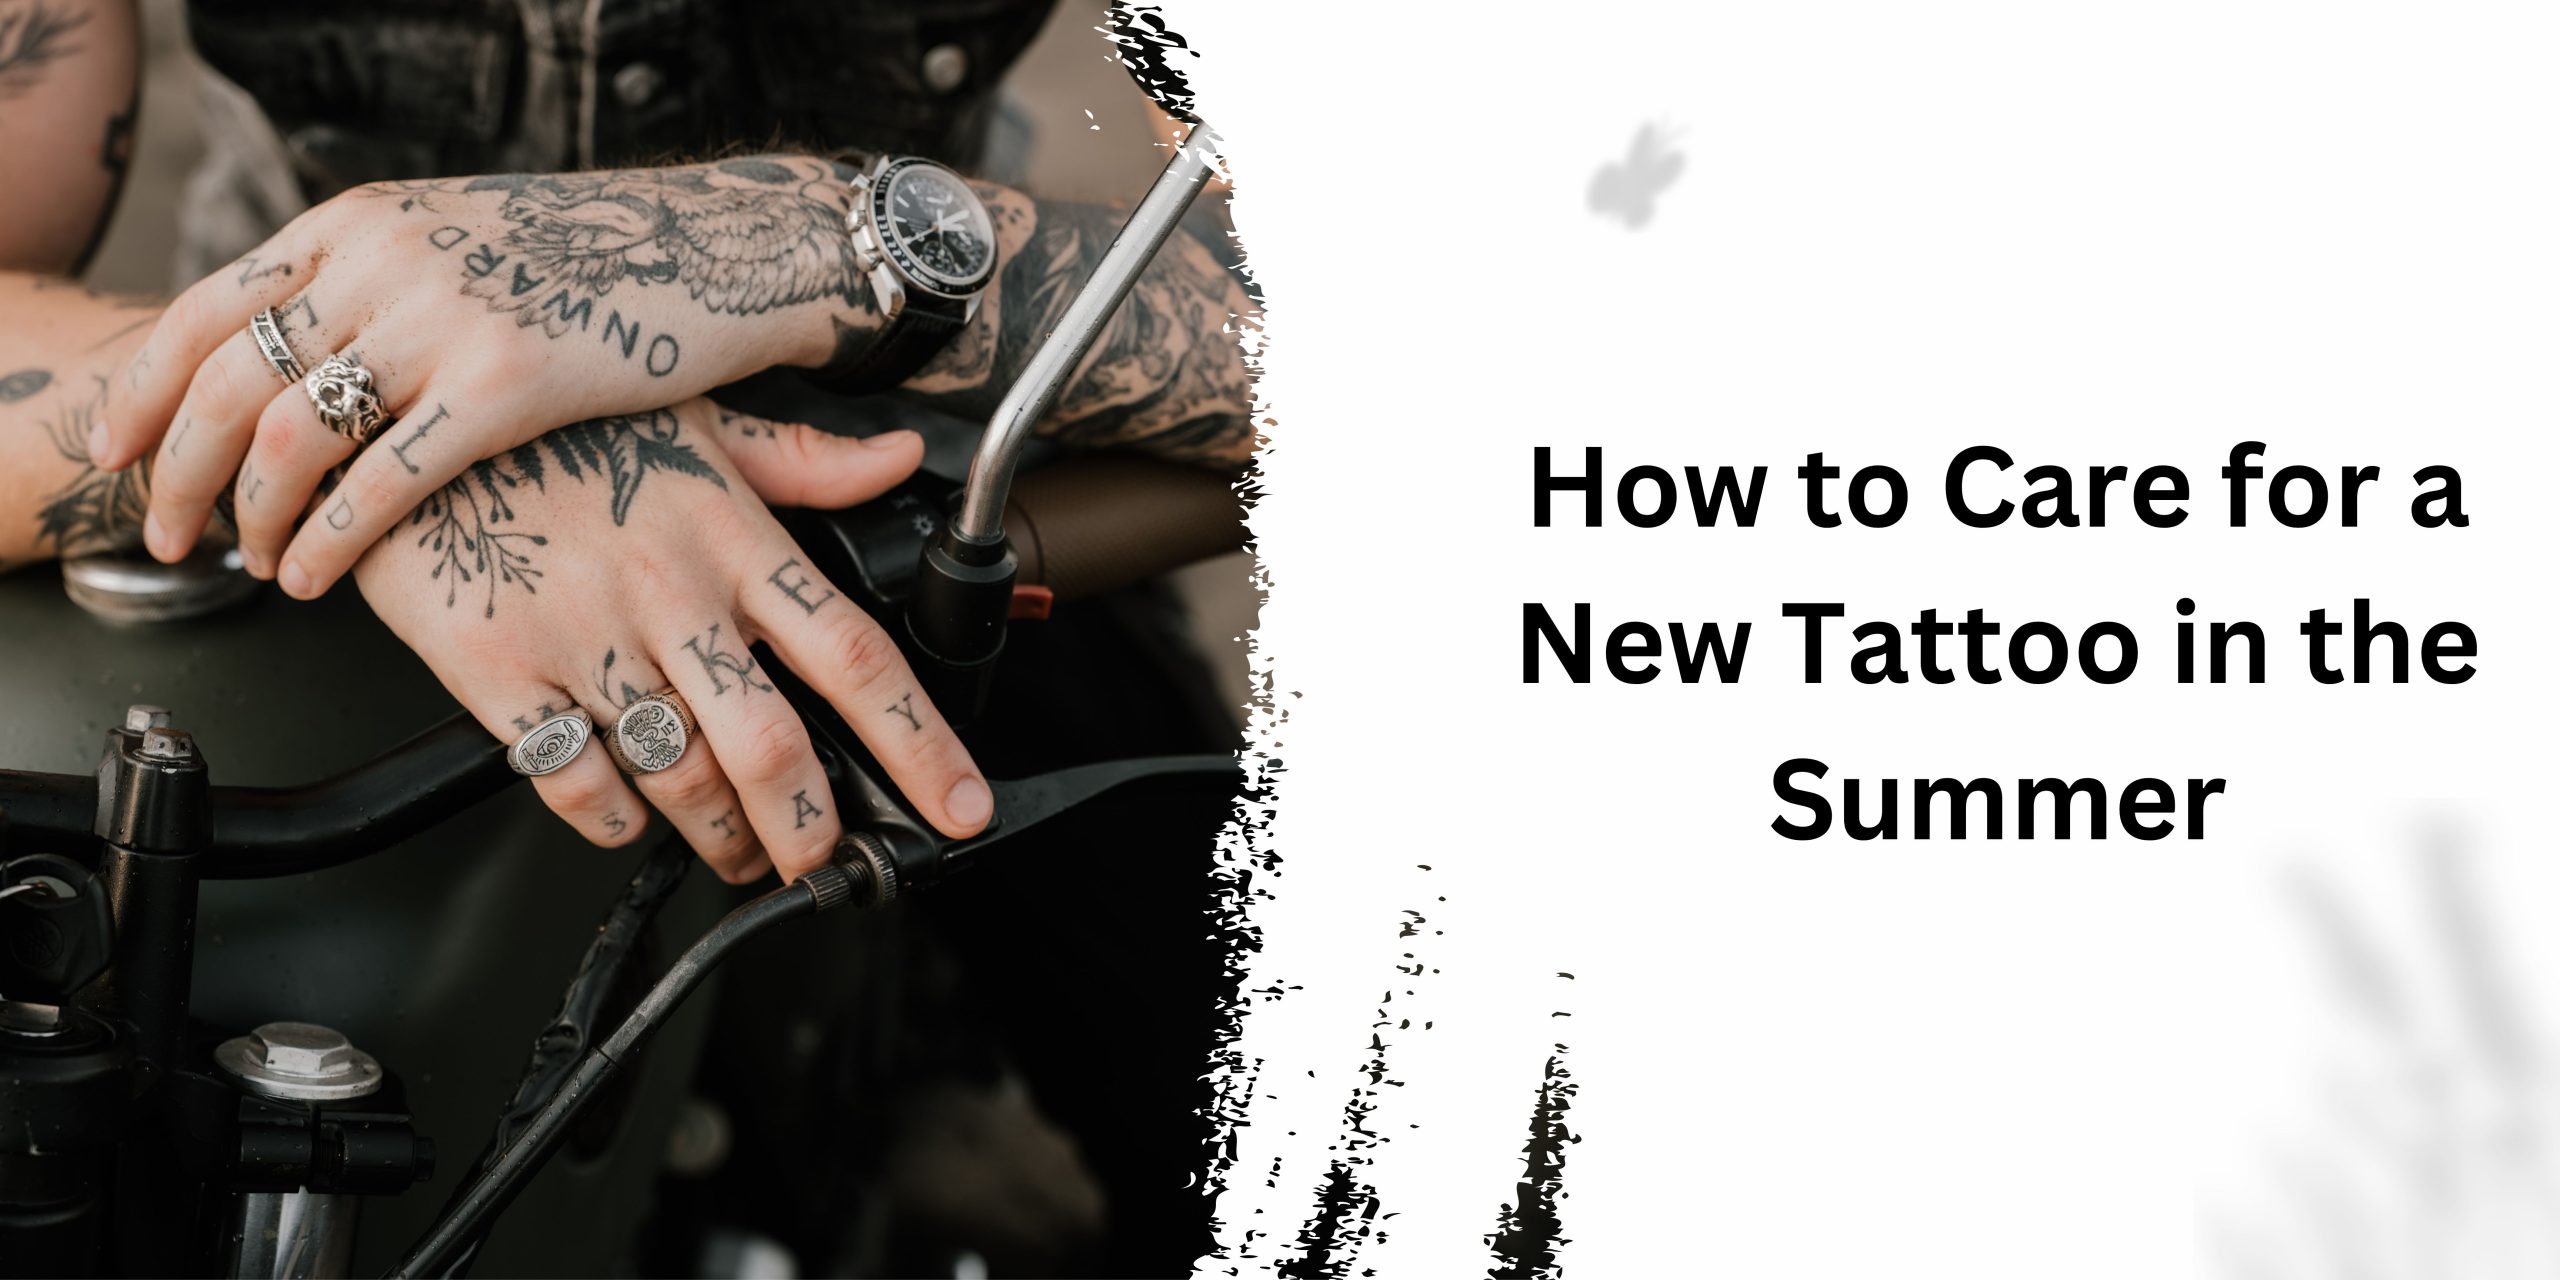 How to Care for a New Tattoo in the Summer